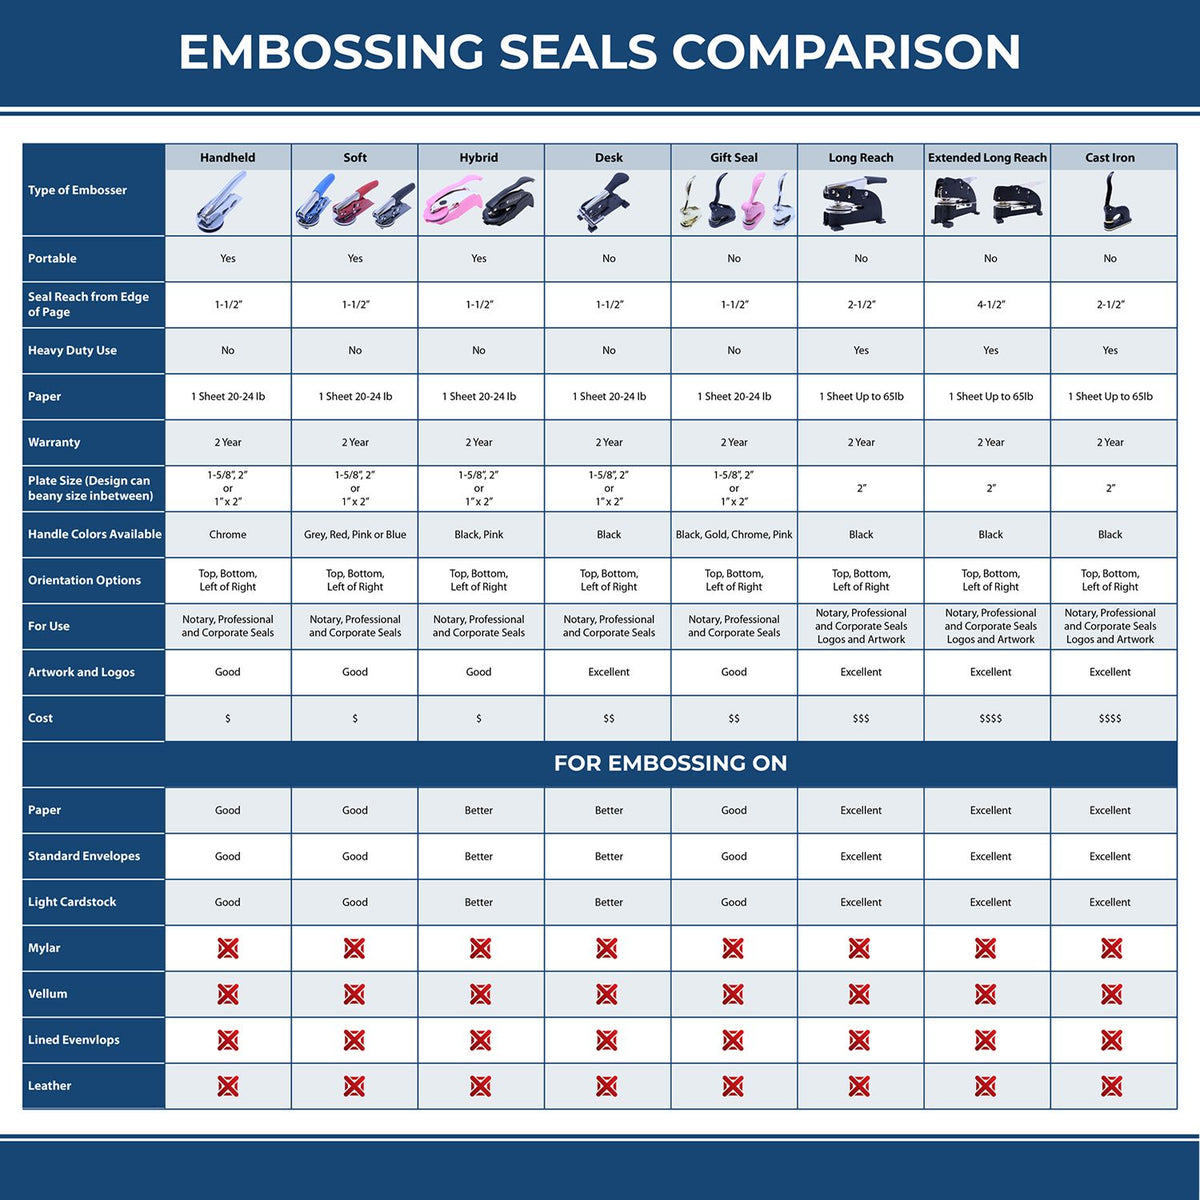 A comparison chart for the different types of mount models available for the Hybrid Kentucky Engineer Seal